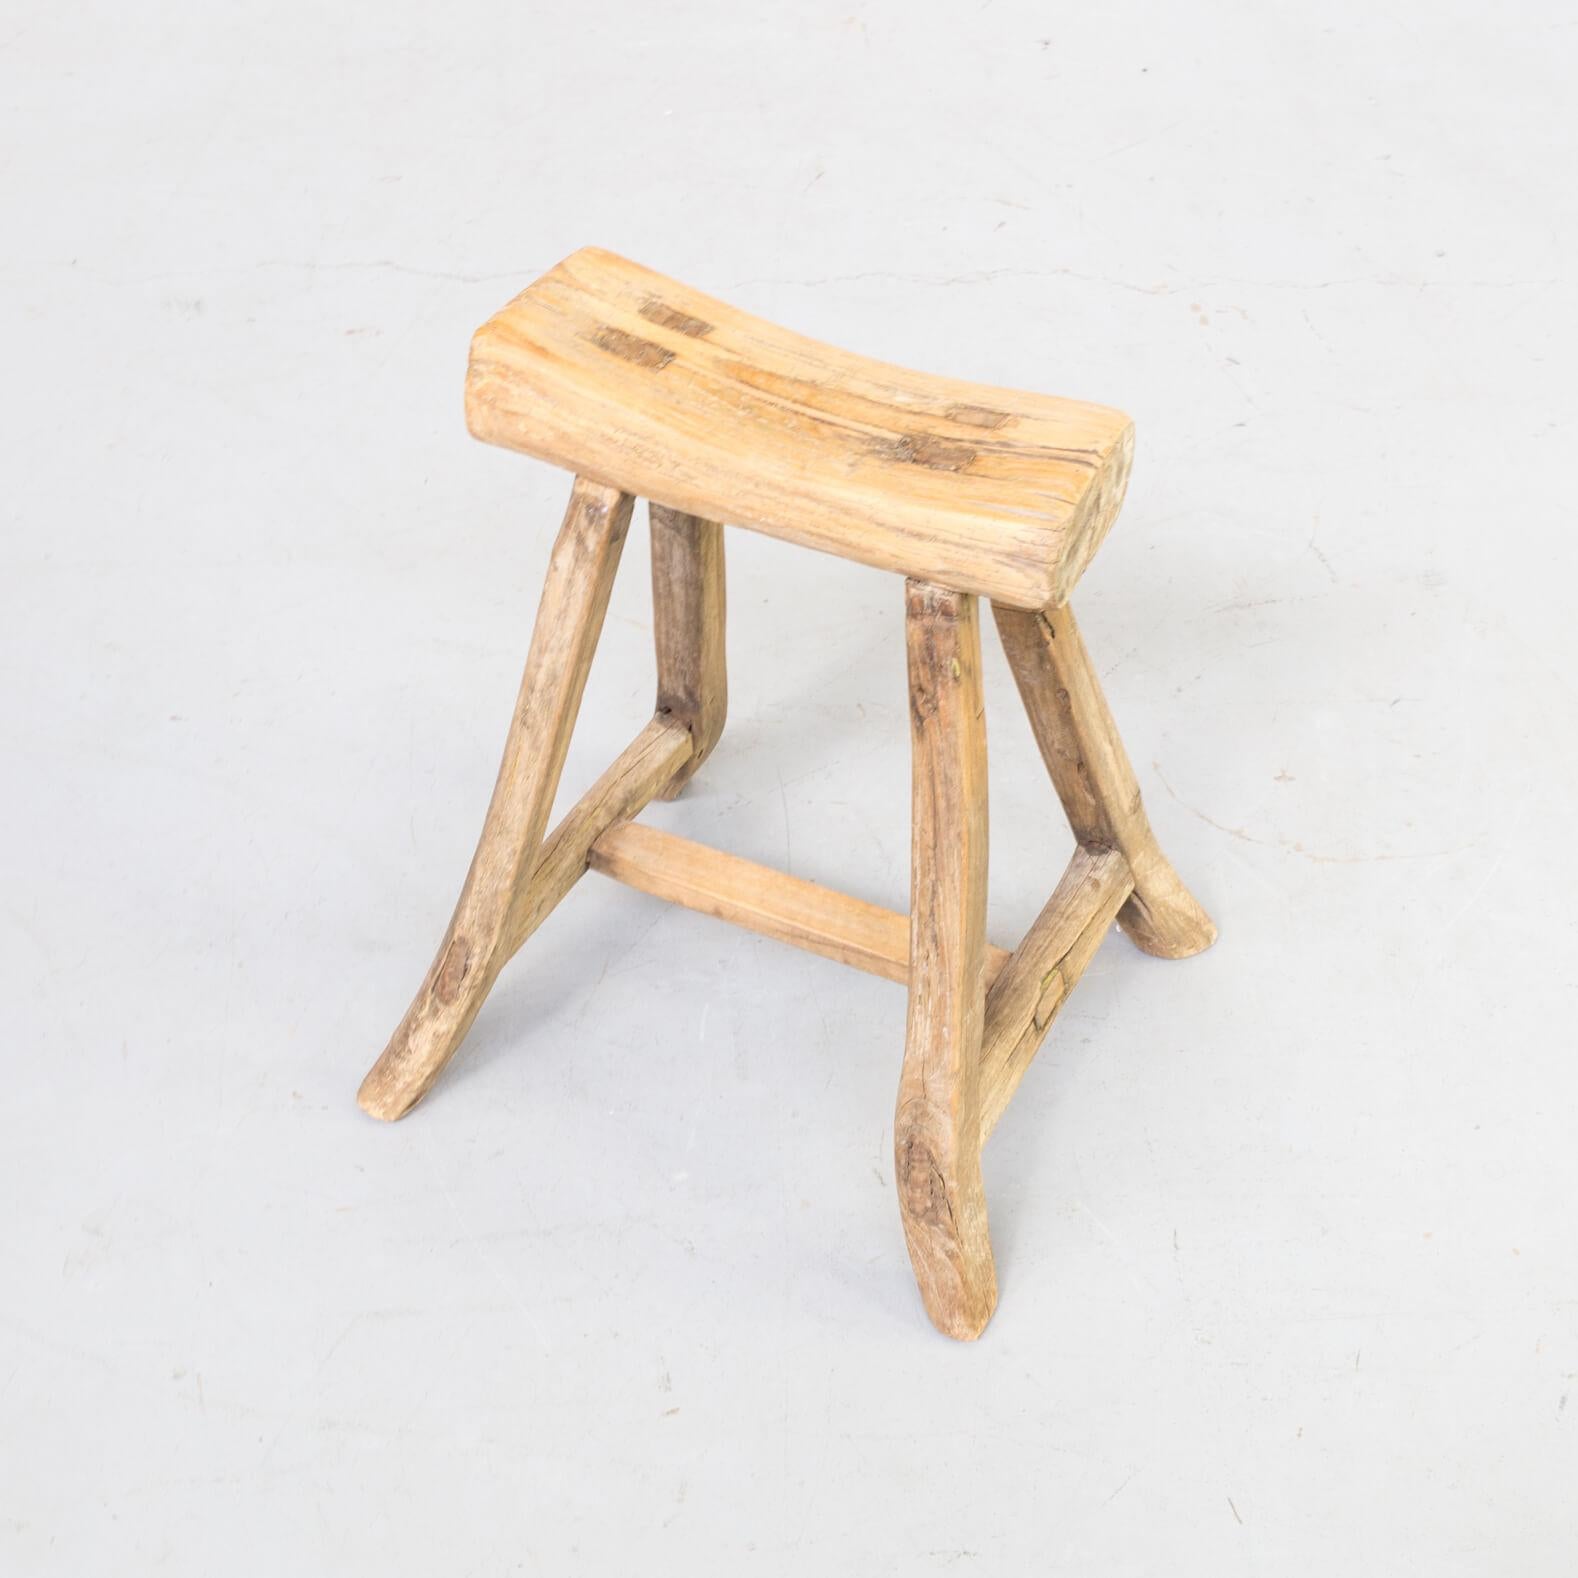 1960s Wooden Chopping Block Stool In Good Condition For Sale In Amstelveen, Noord